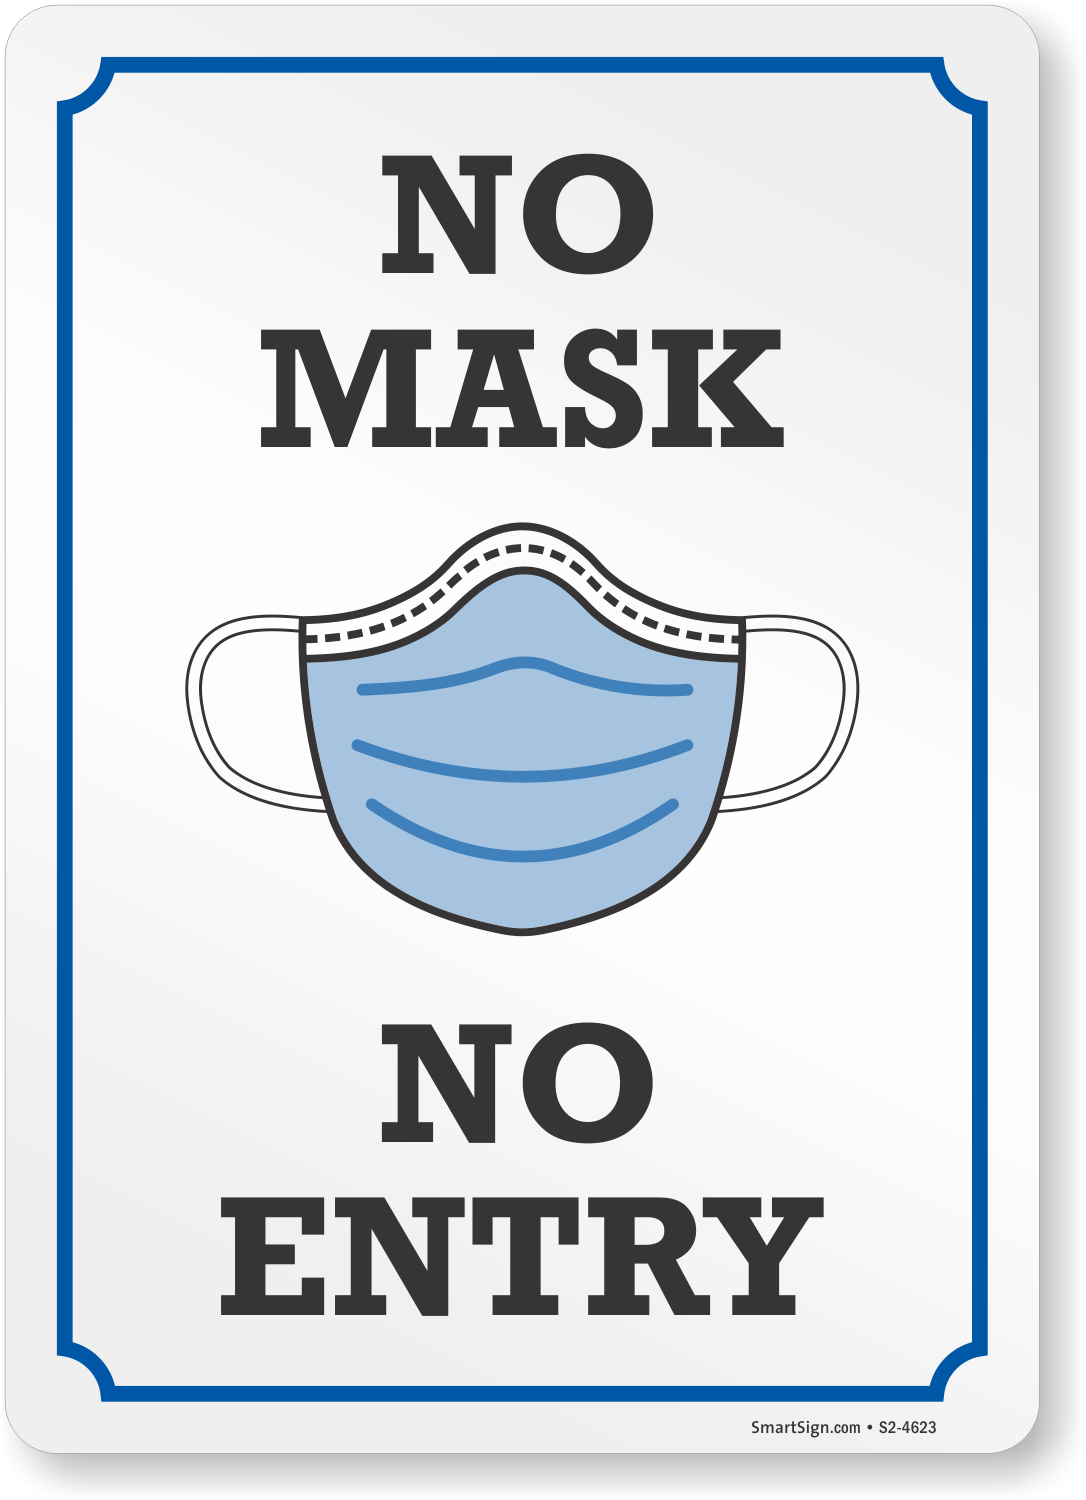 FACE MASKS MUST BE WORN NO ENTRY WITHOUT FACE MASKS COVERINGS DISTANCING STICKER 